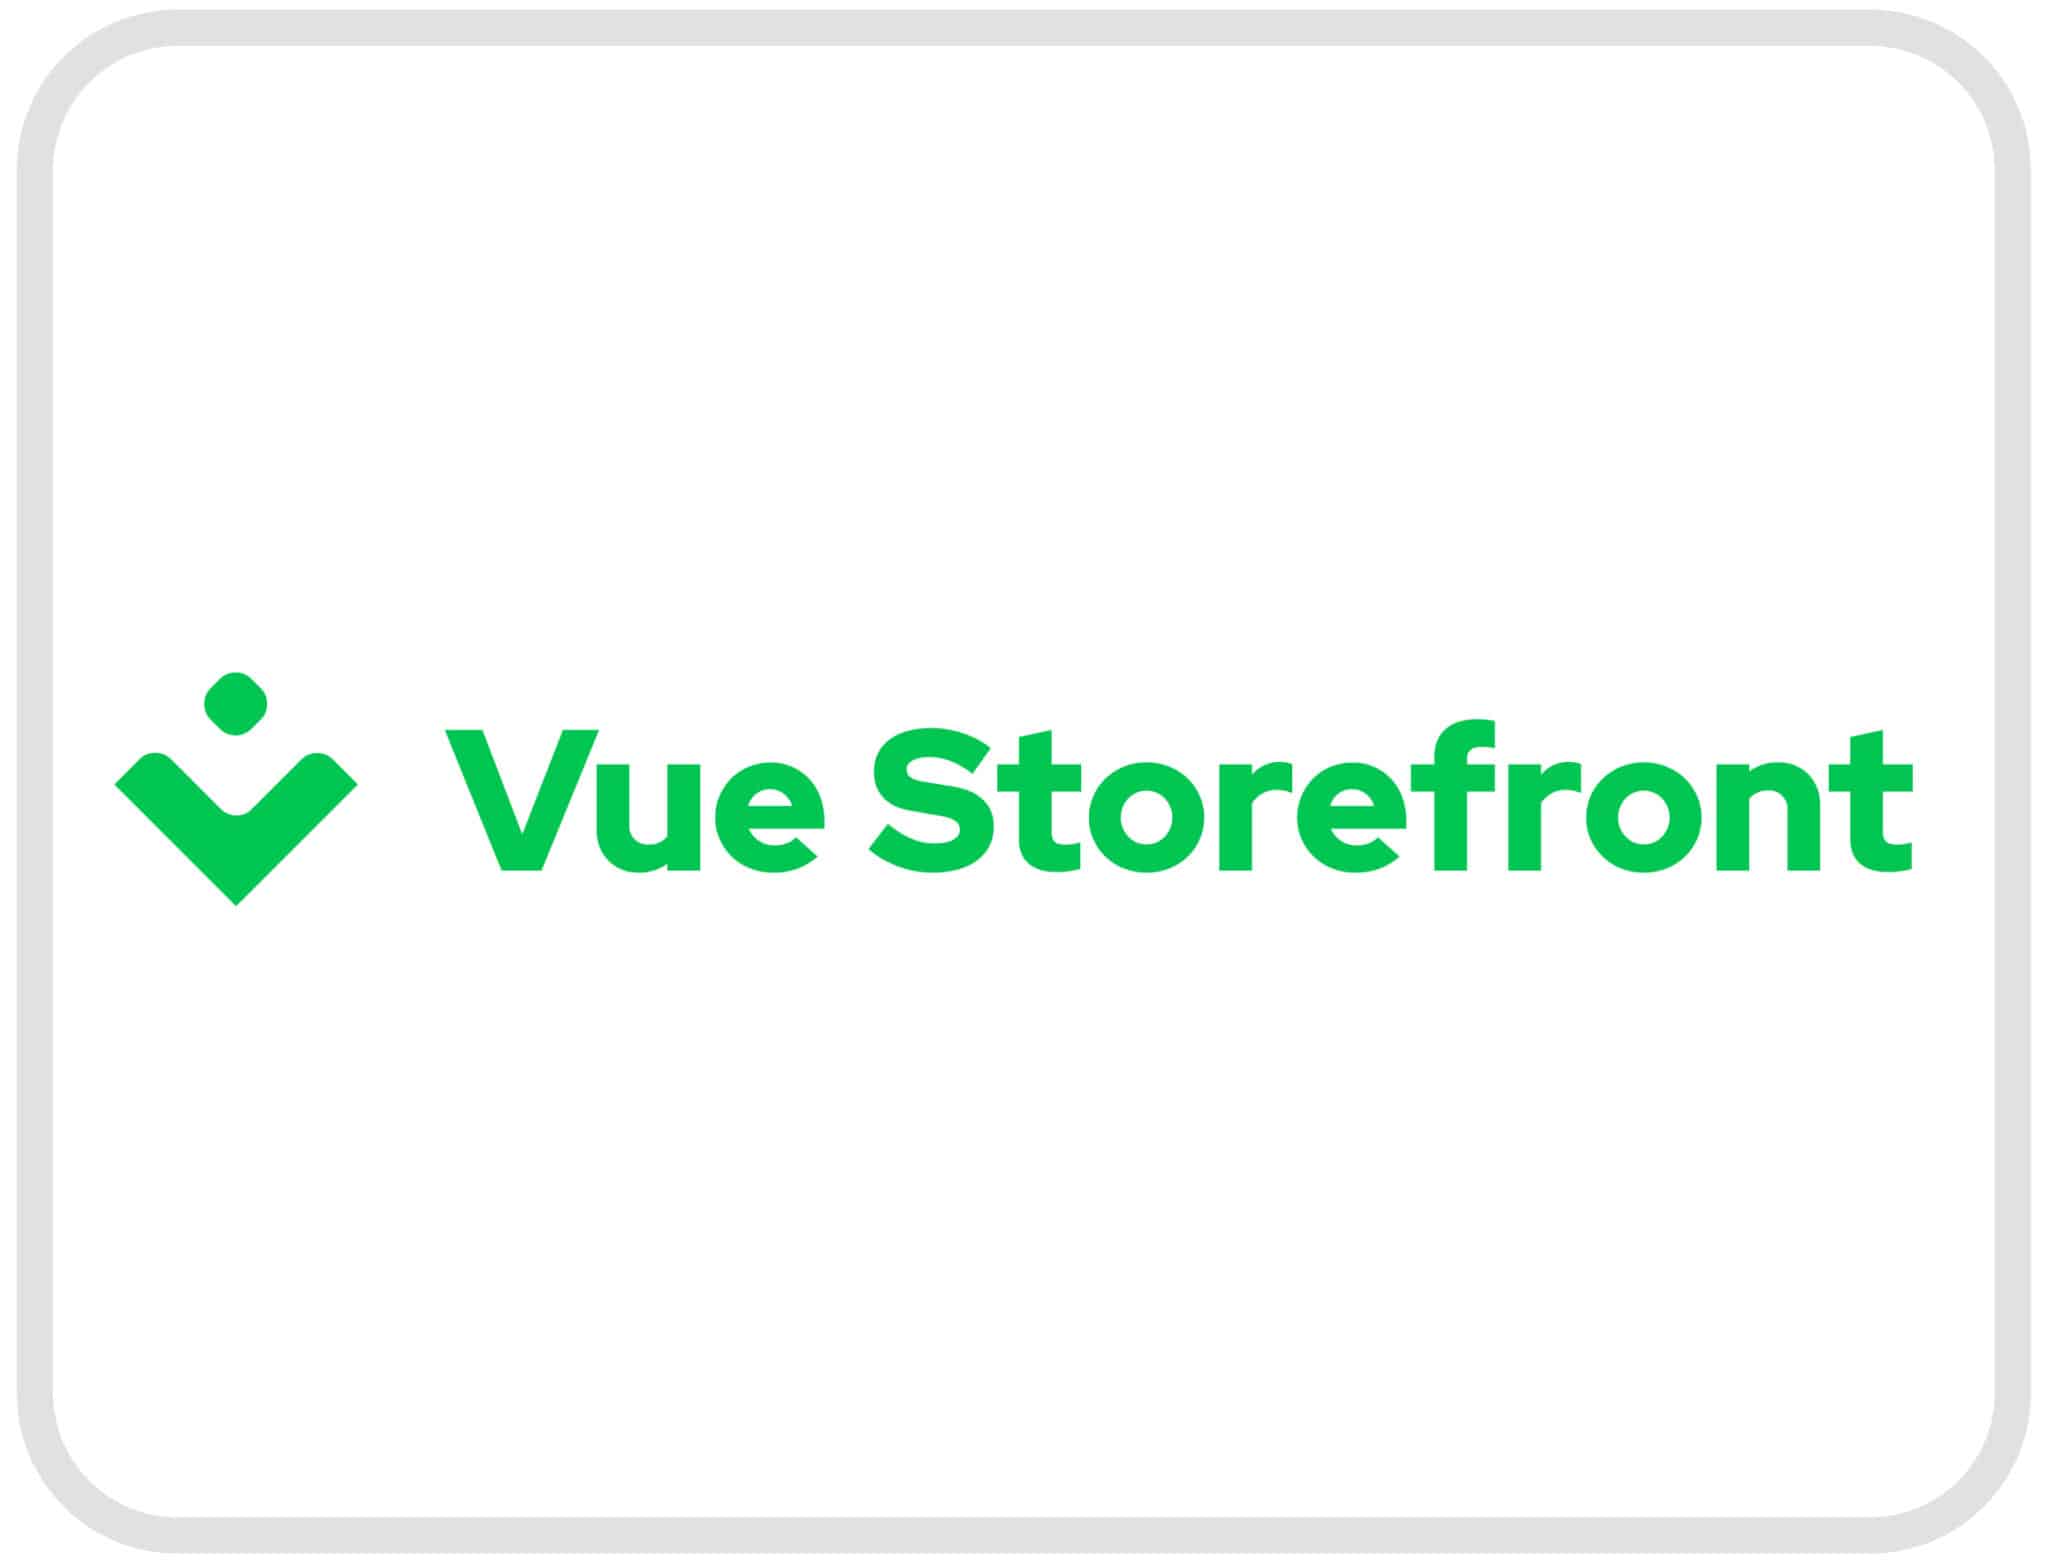 This is the Vue Storefront logo